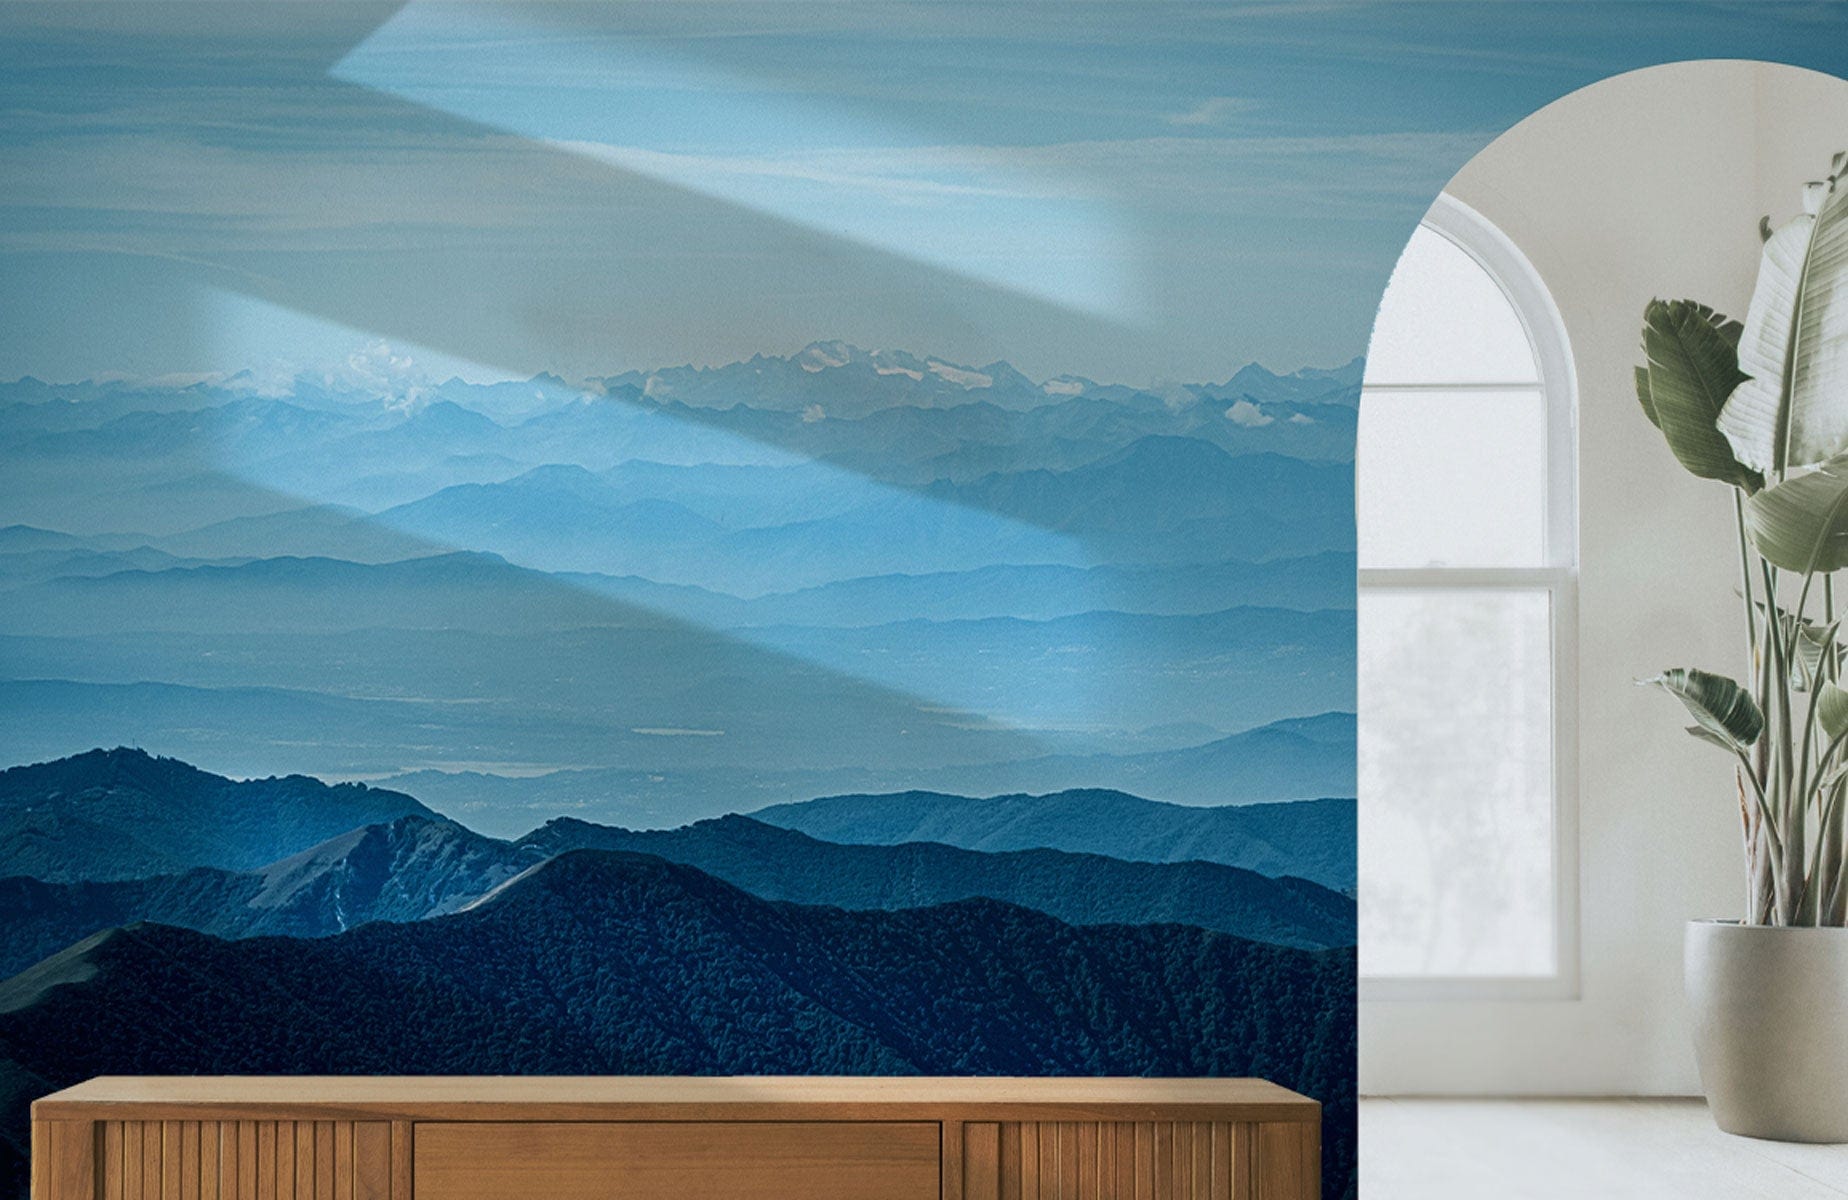 Wallpaper mural depicting the misty Rocky Mountains, perfect for use as a hallway decoration